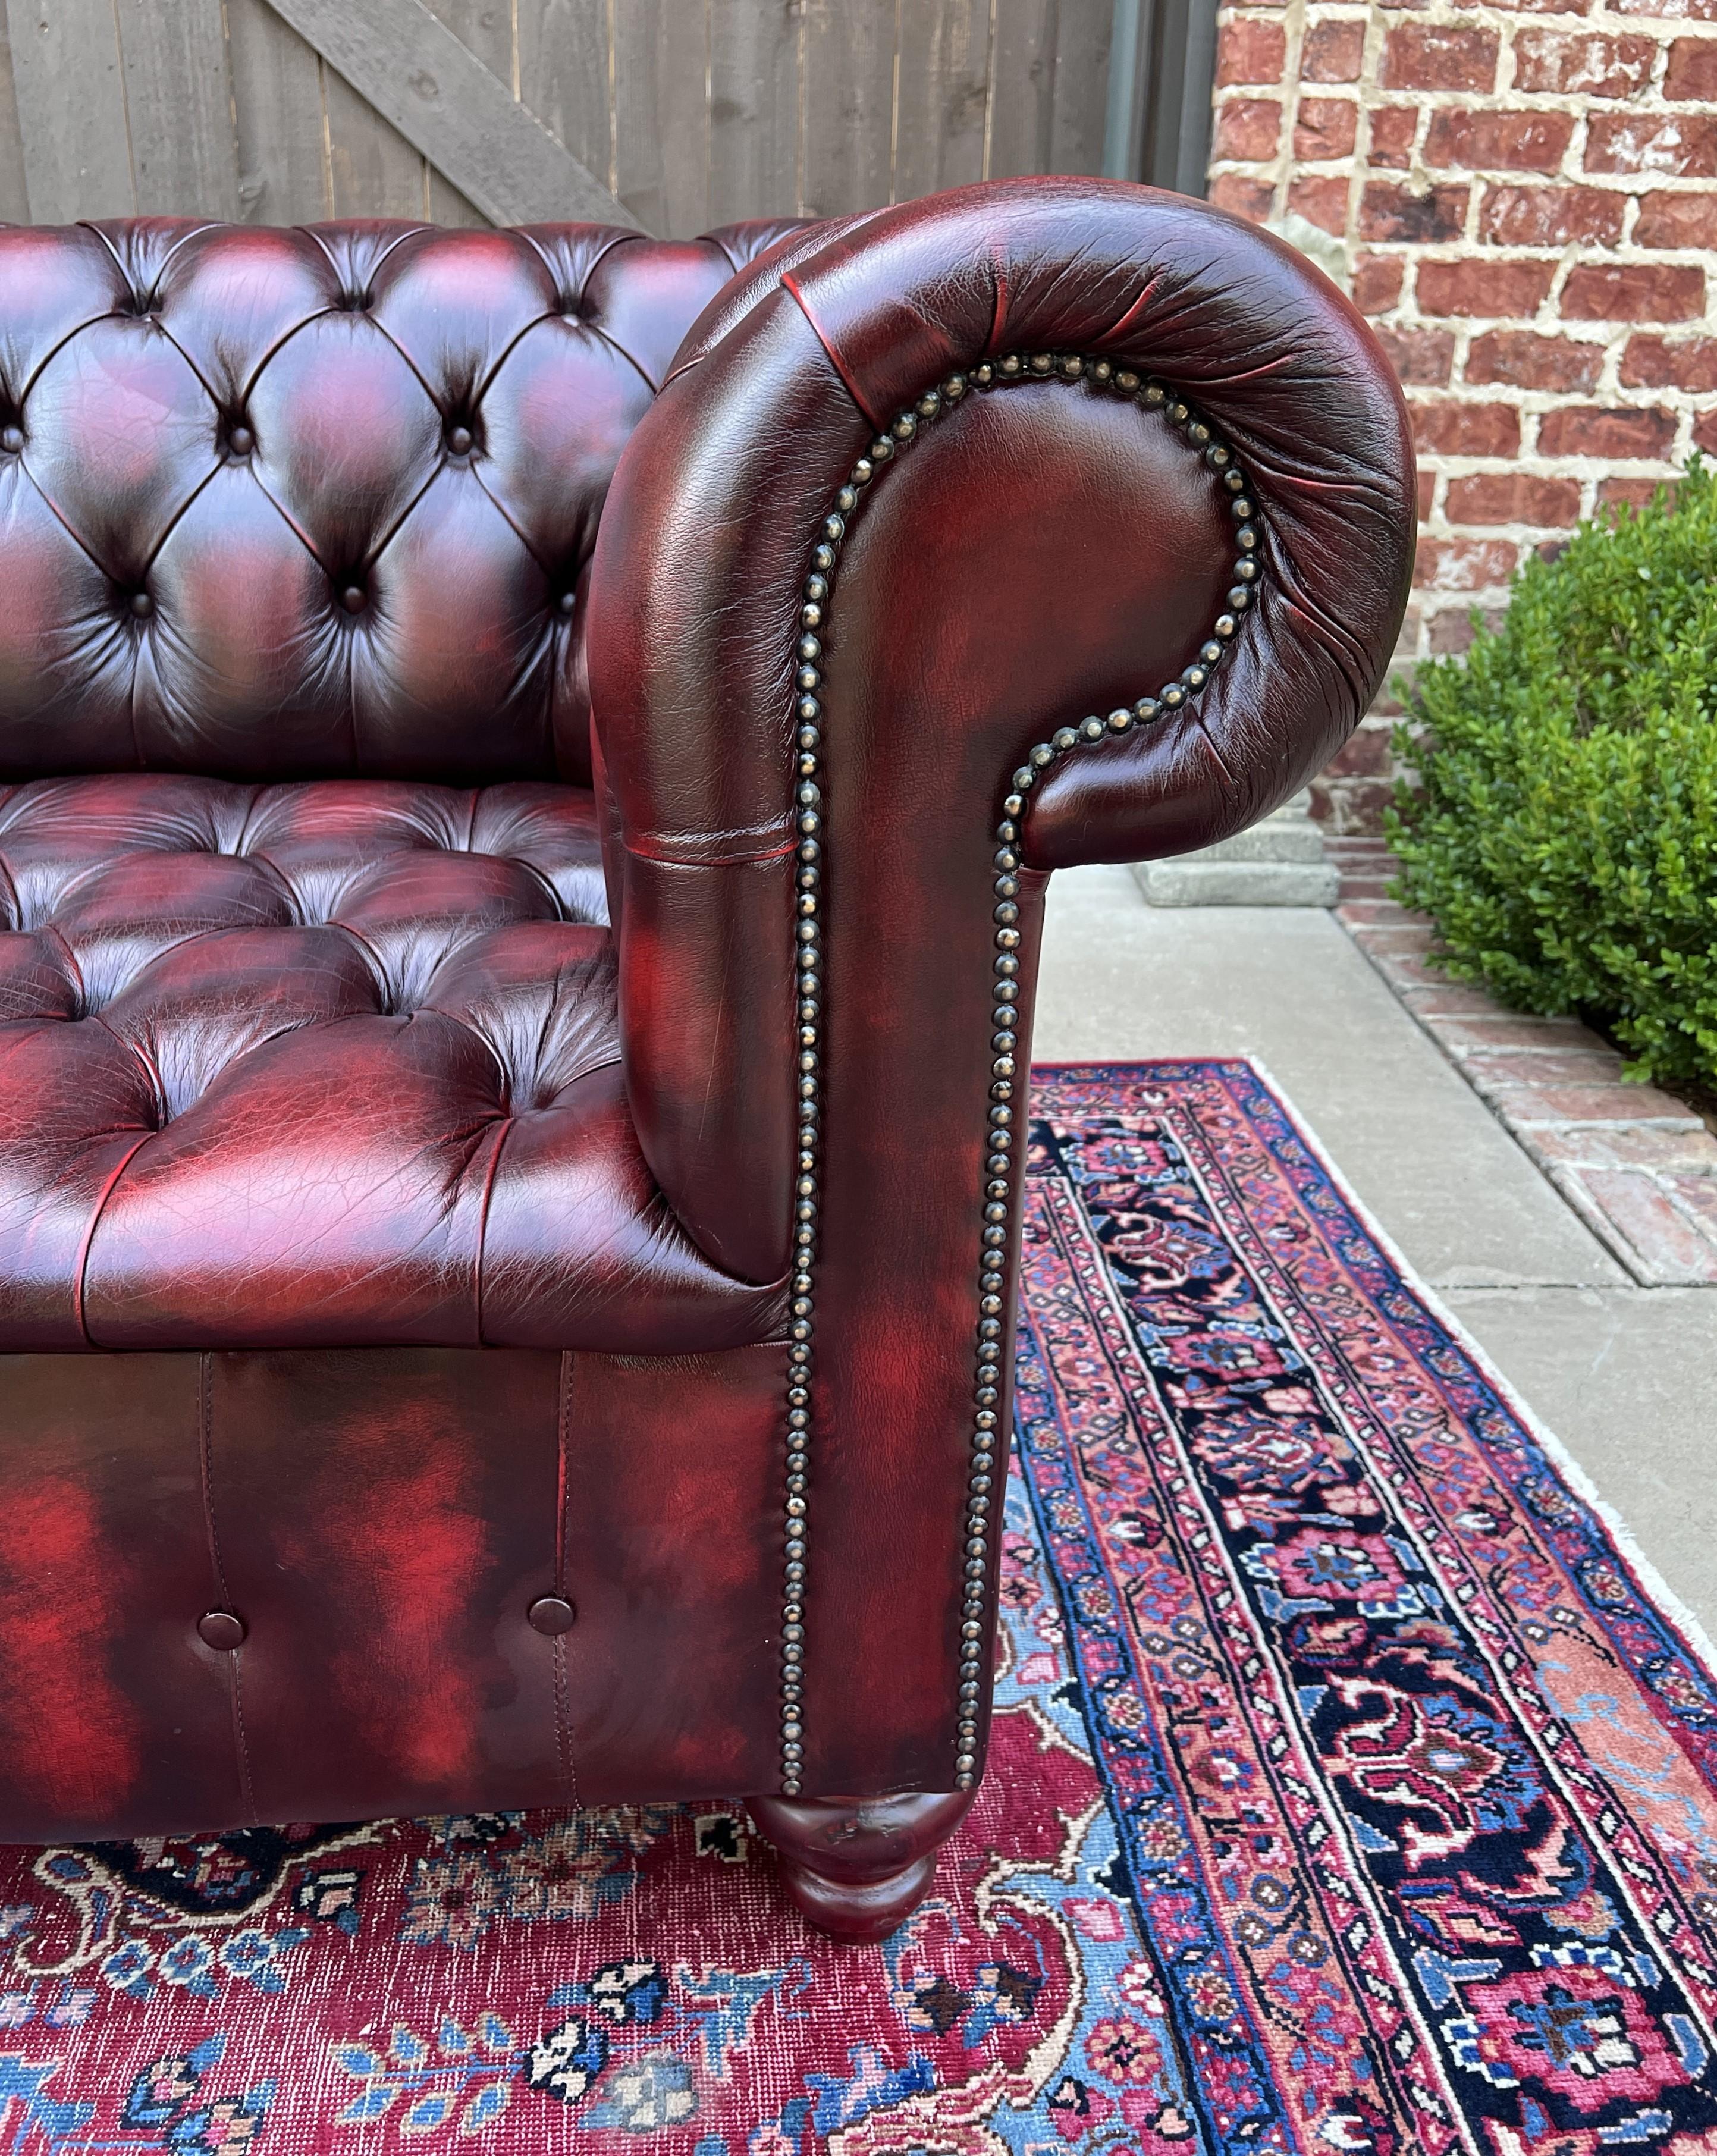 Vintage English Chesterfield Leather Sofa Tufted Seat Oxblood Red Mid-Century #2 9